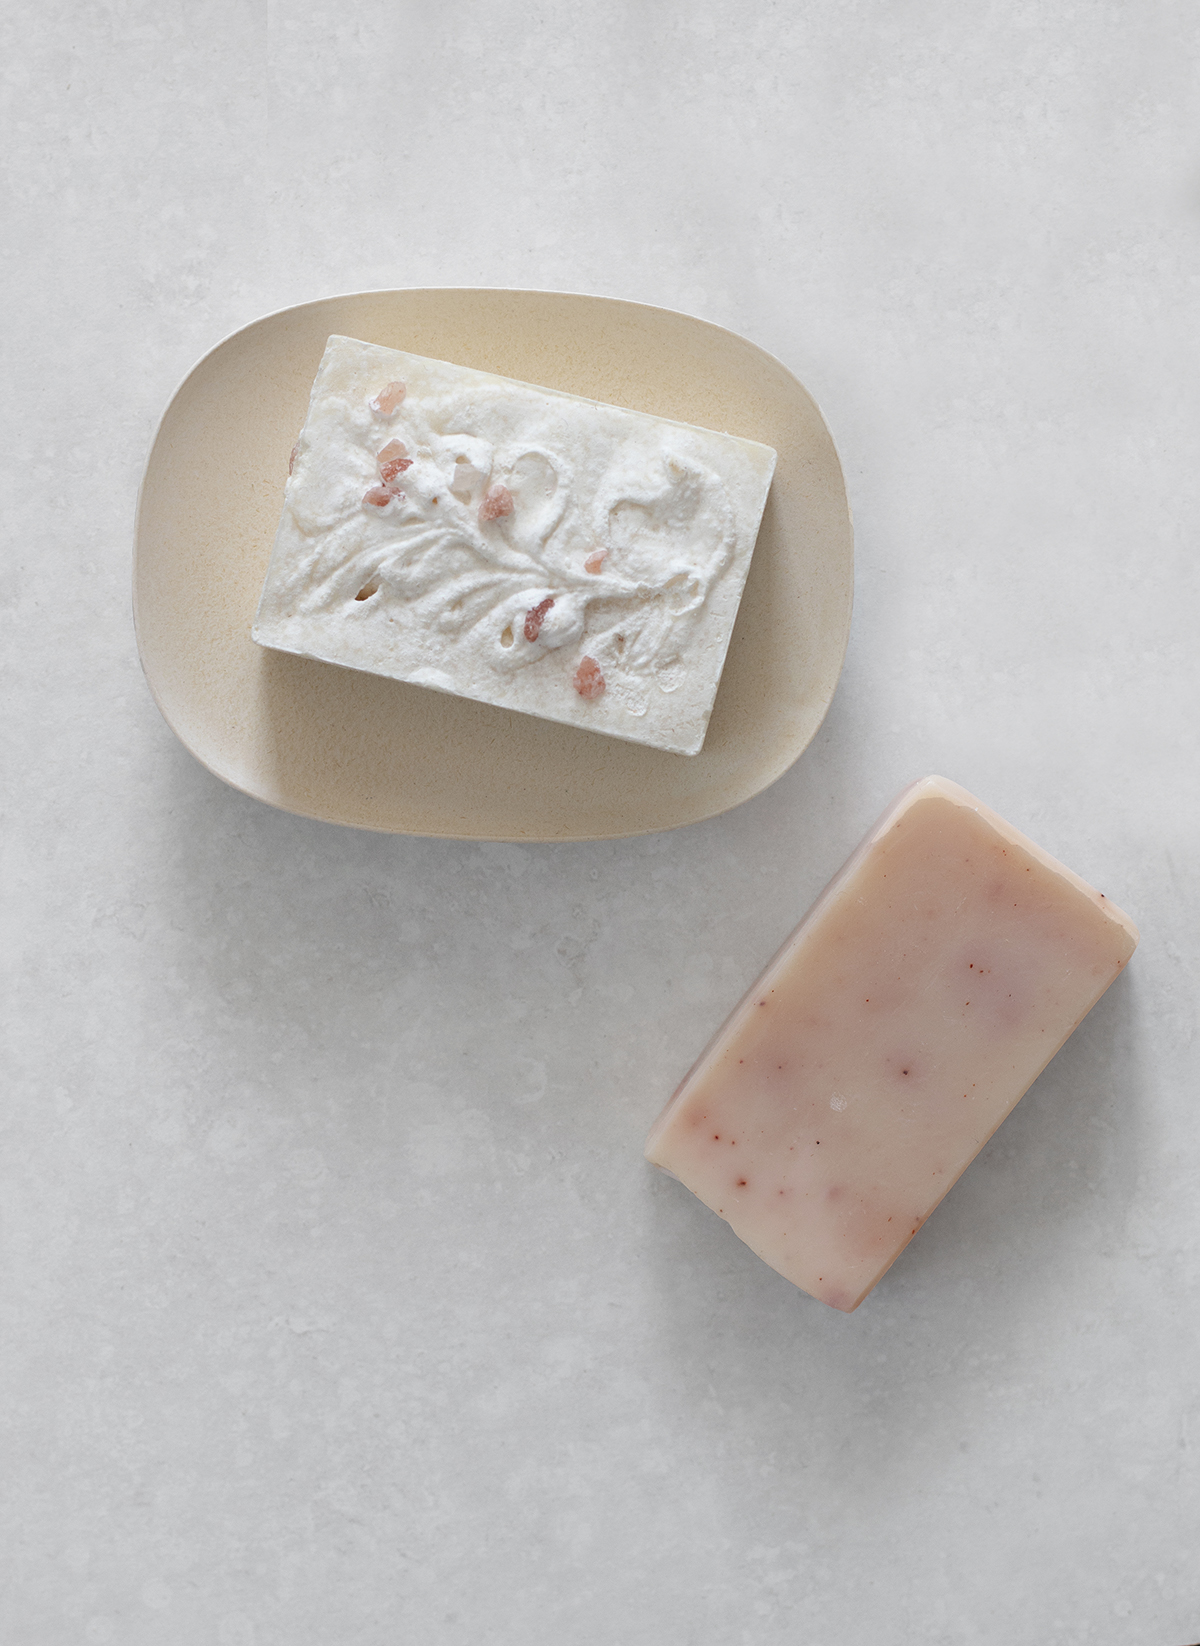 The best bar soaps you need to try